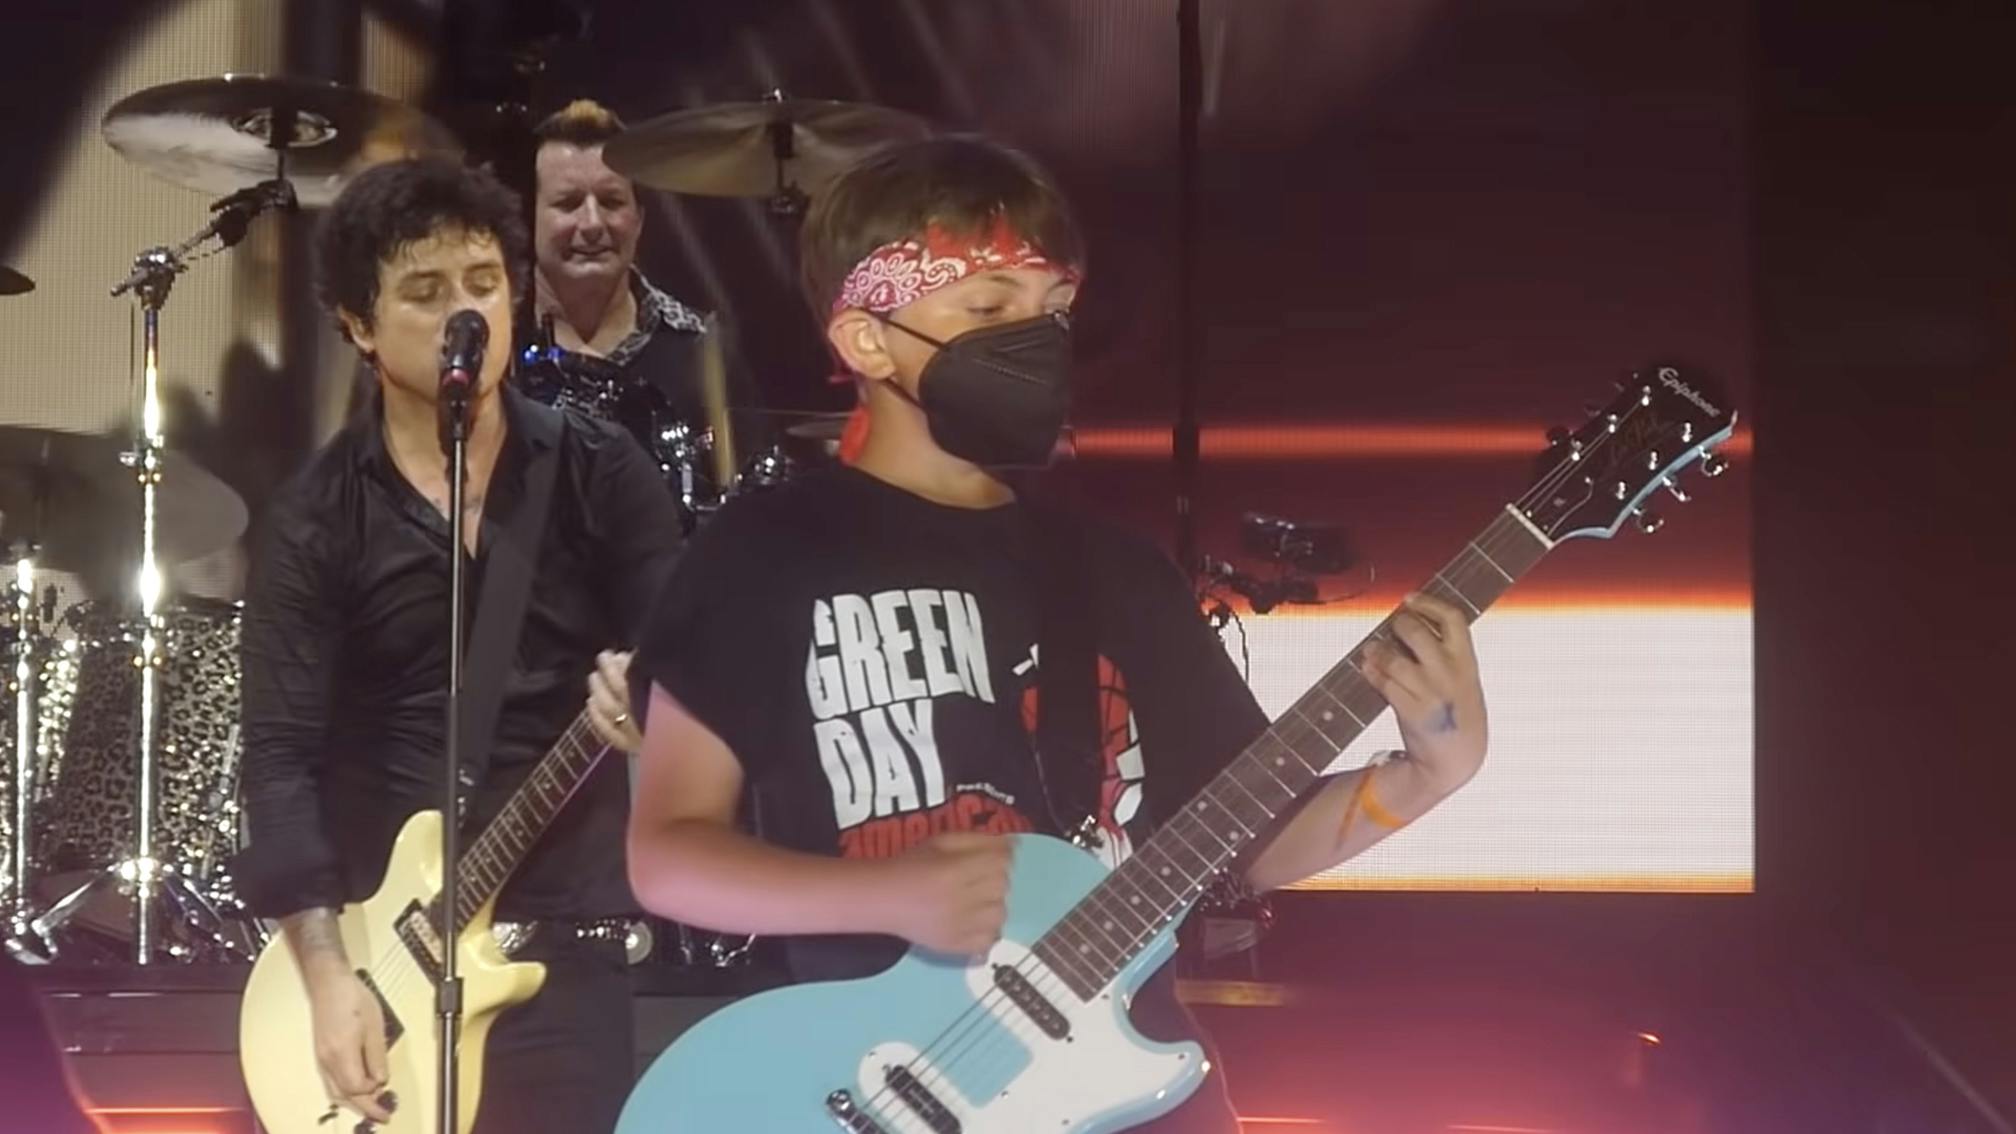 11-year-old rocks out on guitar with Green Day at Hella Mega Tour